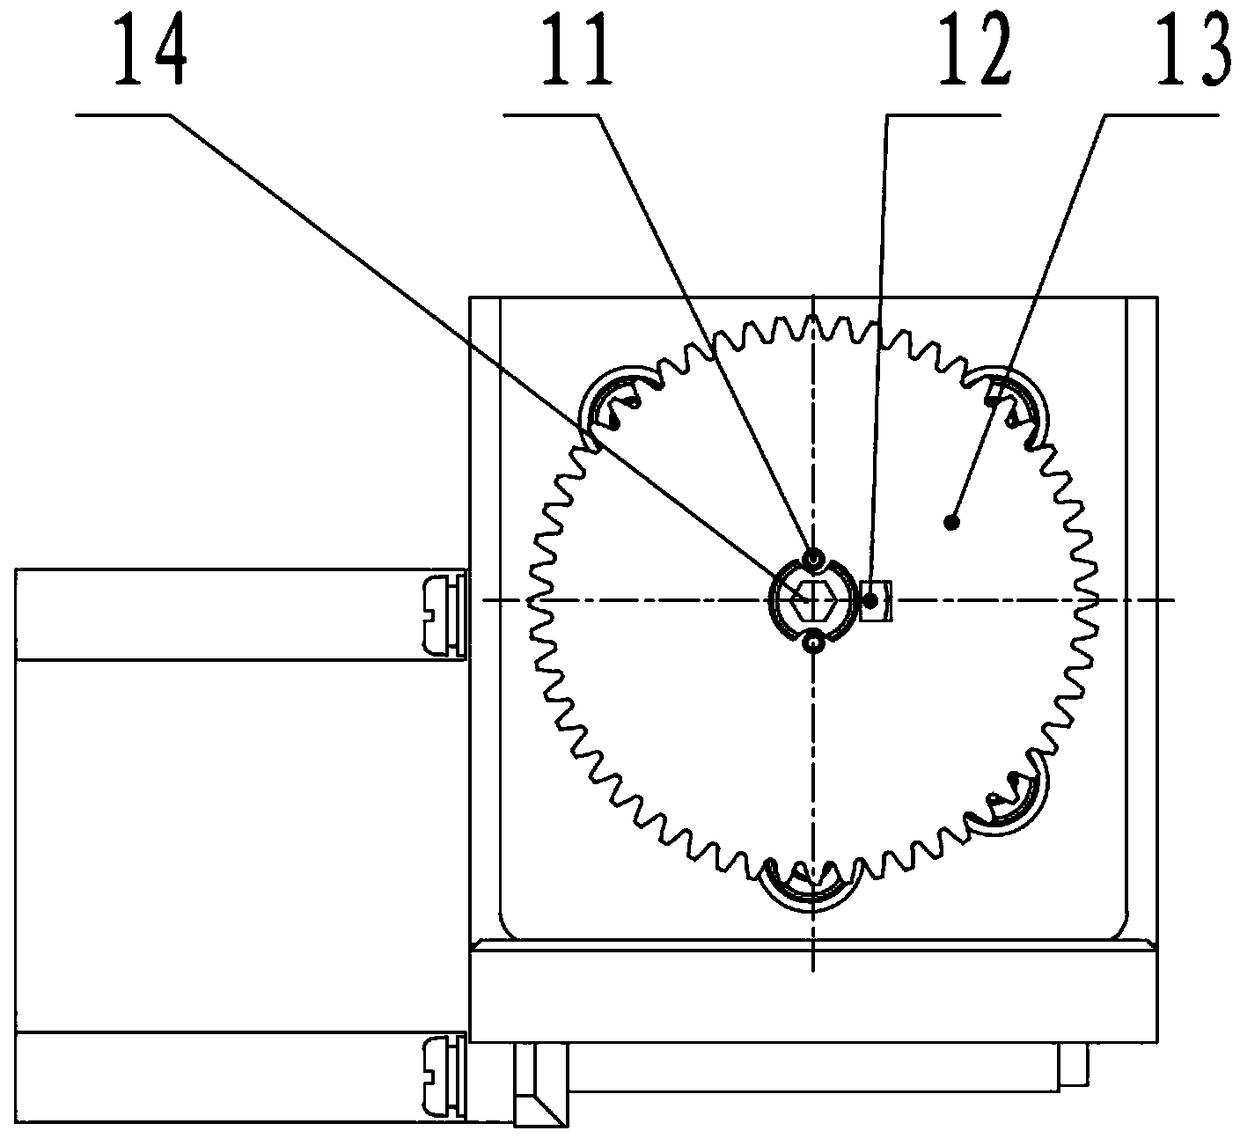 Rotary positioning and orientation equipment